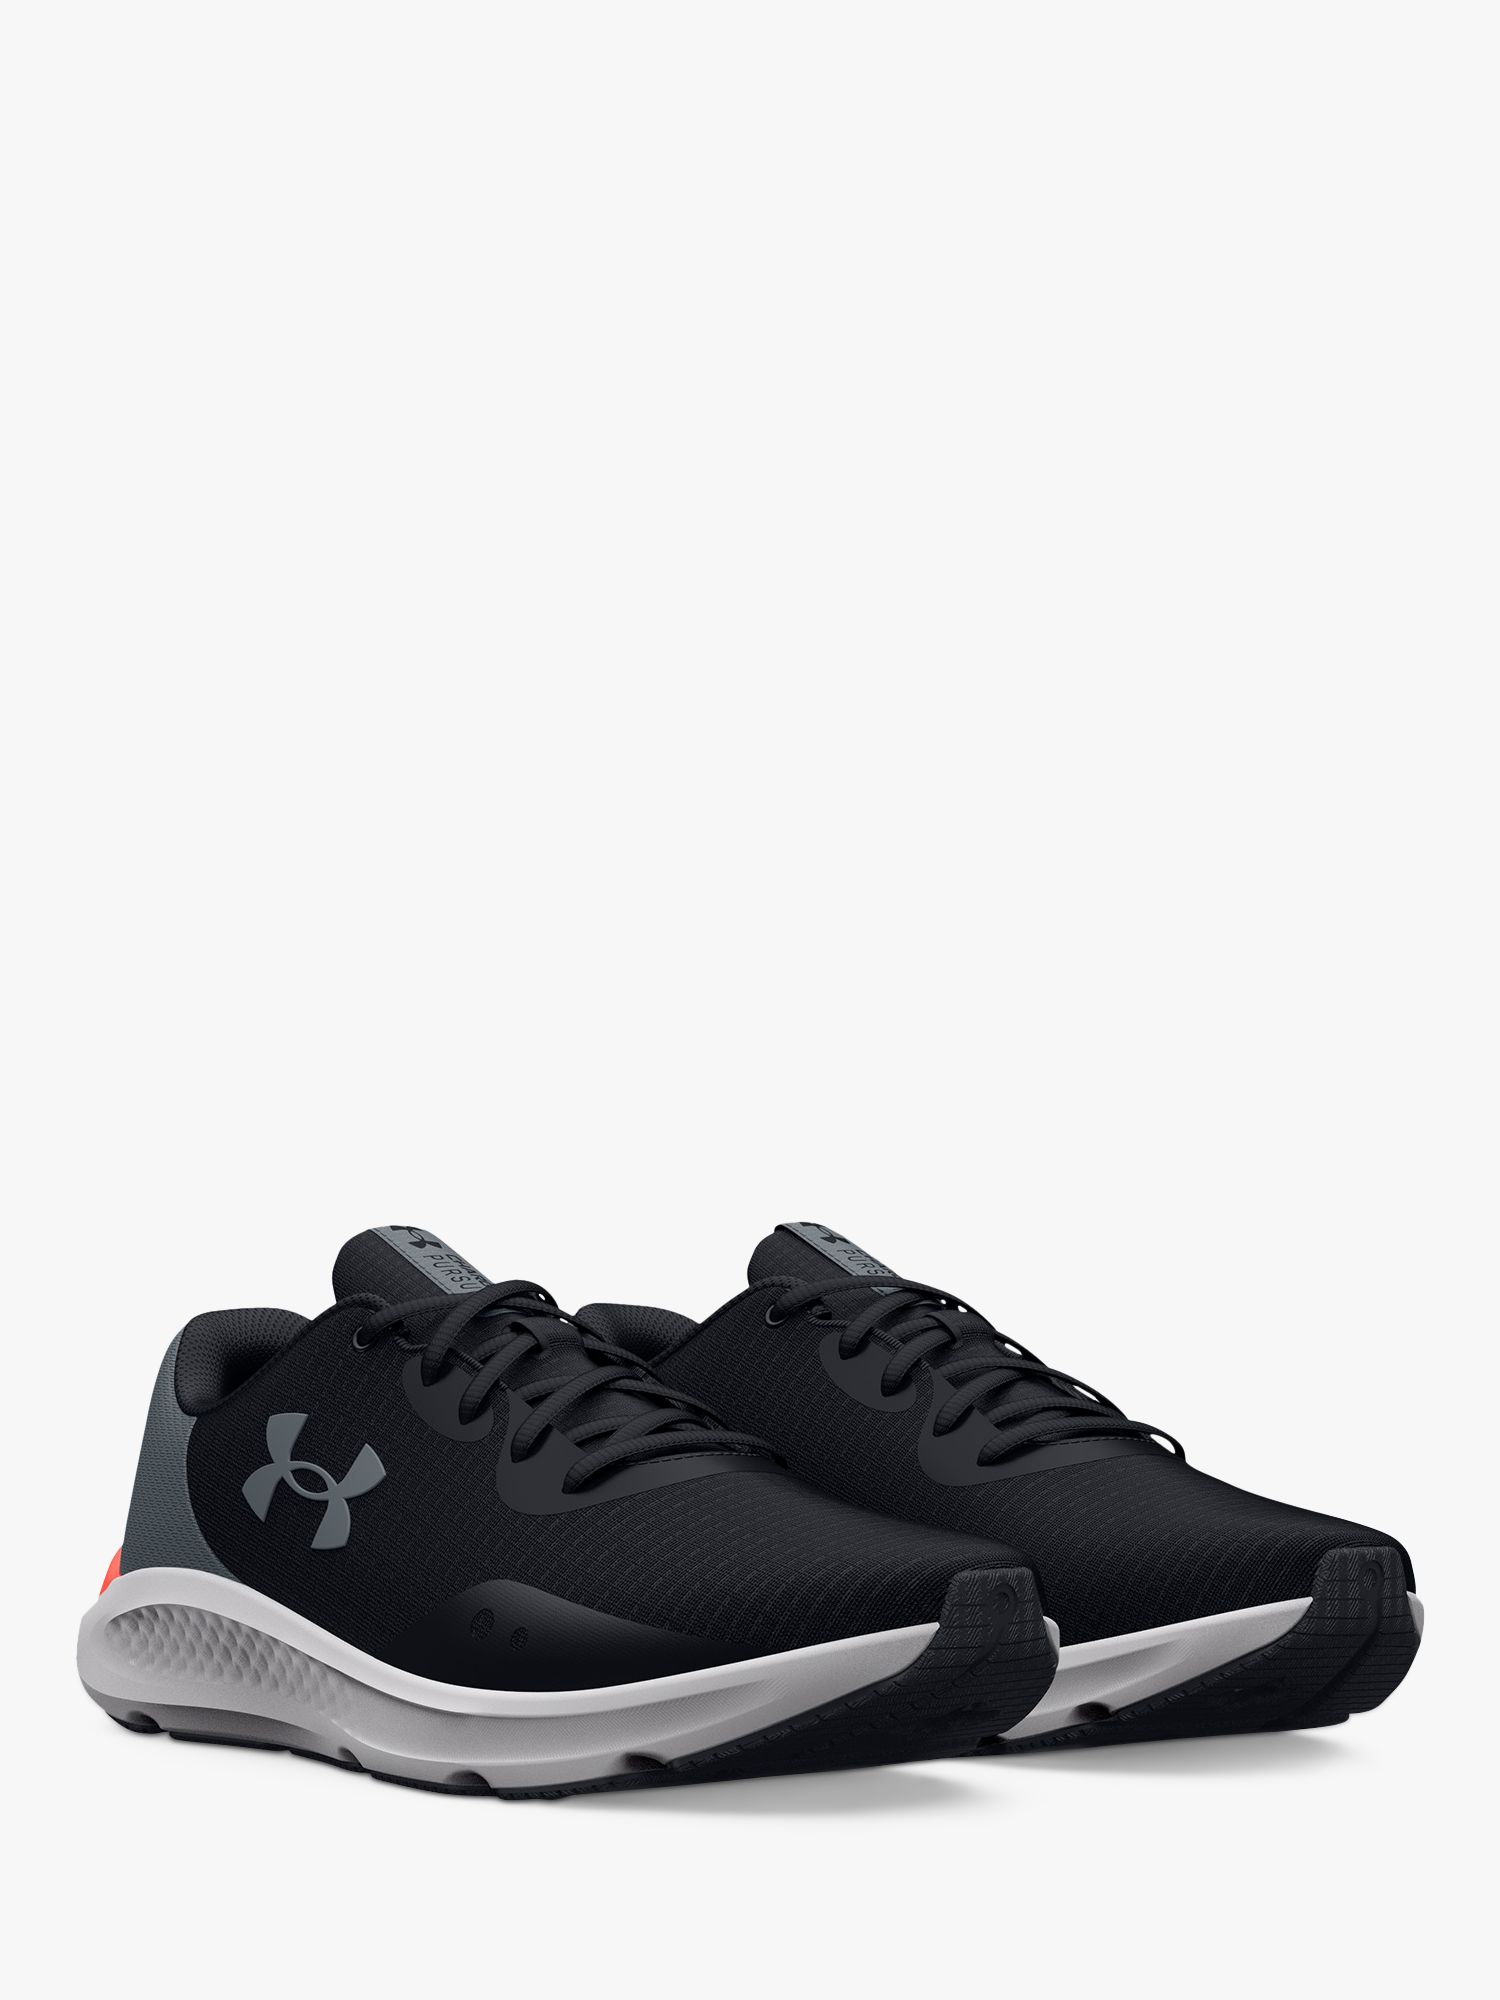 Under Armour Charged Pursuit 3 Tech Review 